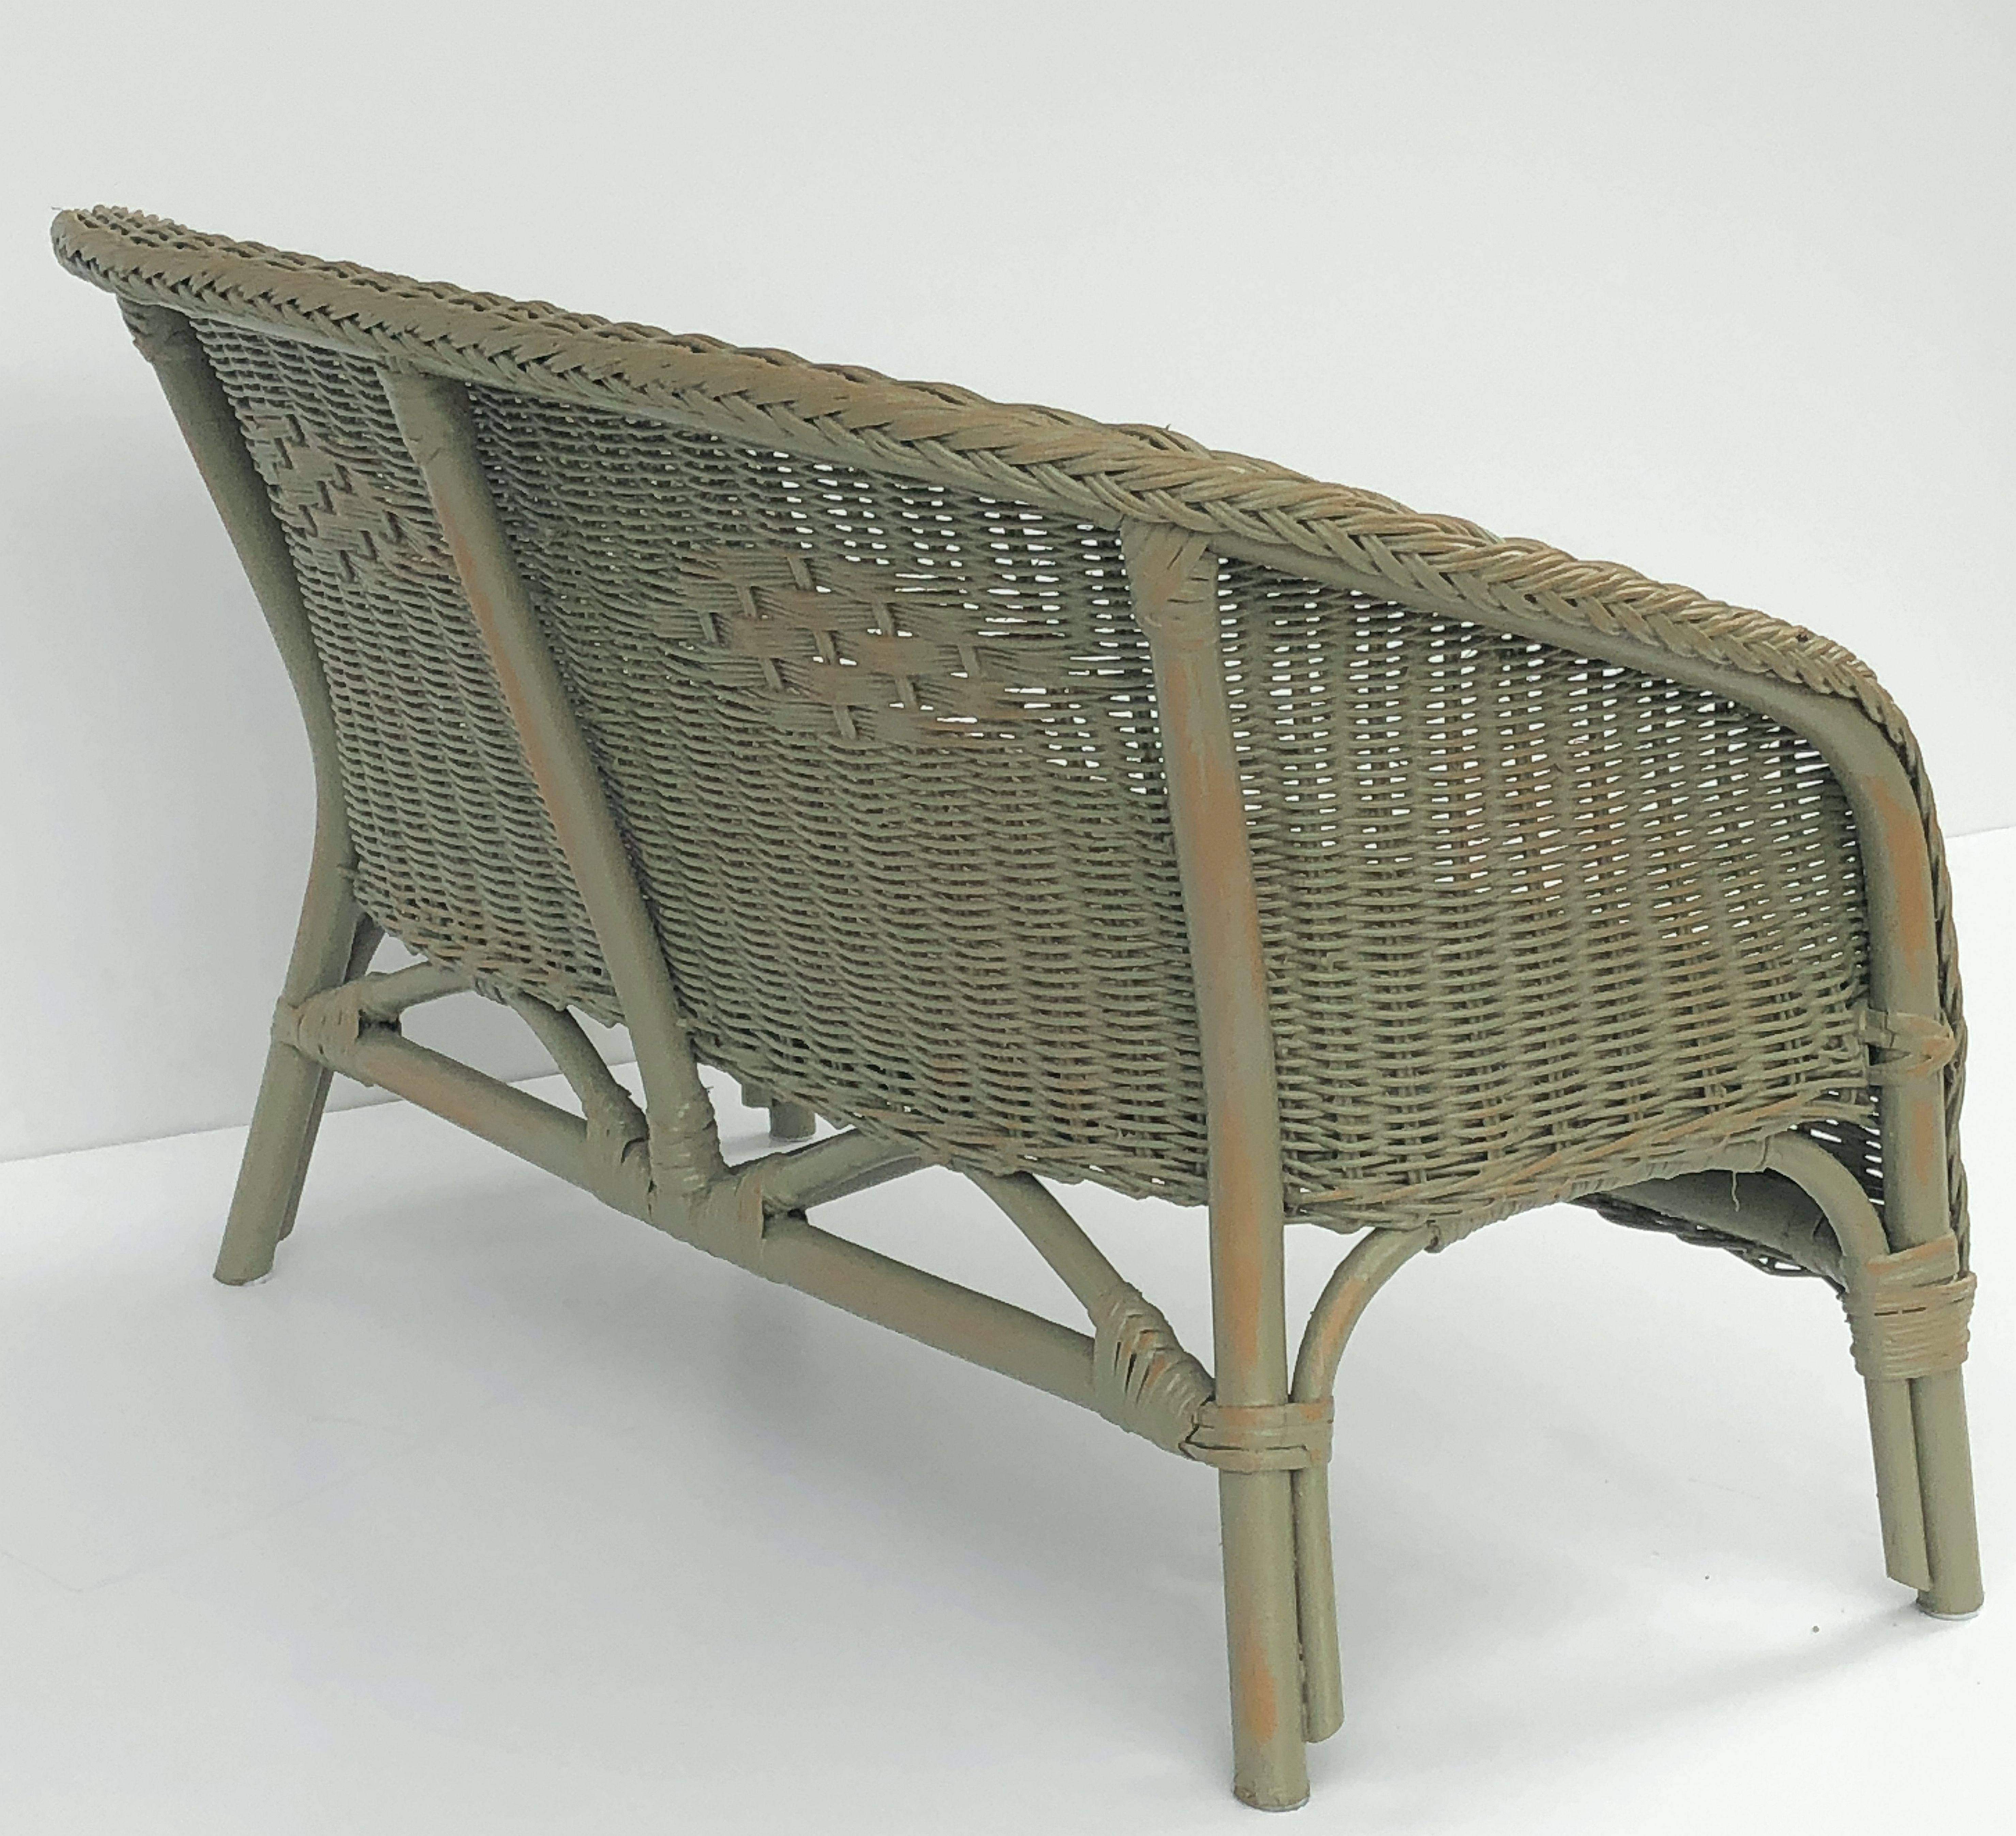 English Wicker Garden Child's Settee Bench or Seat by Lloyd Loom 1